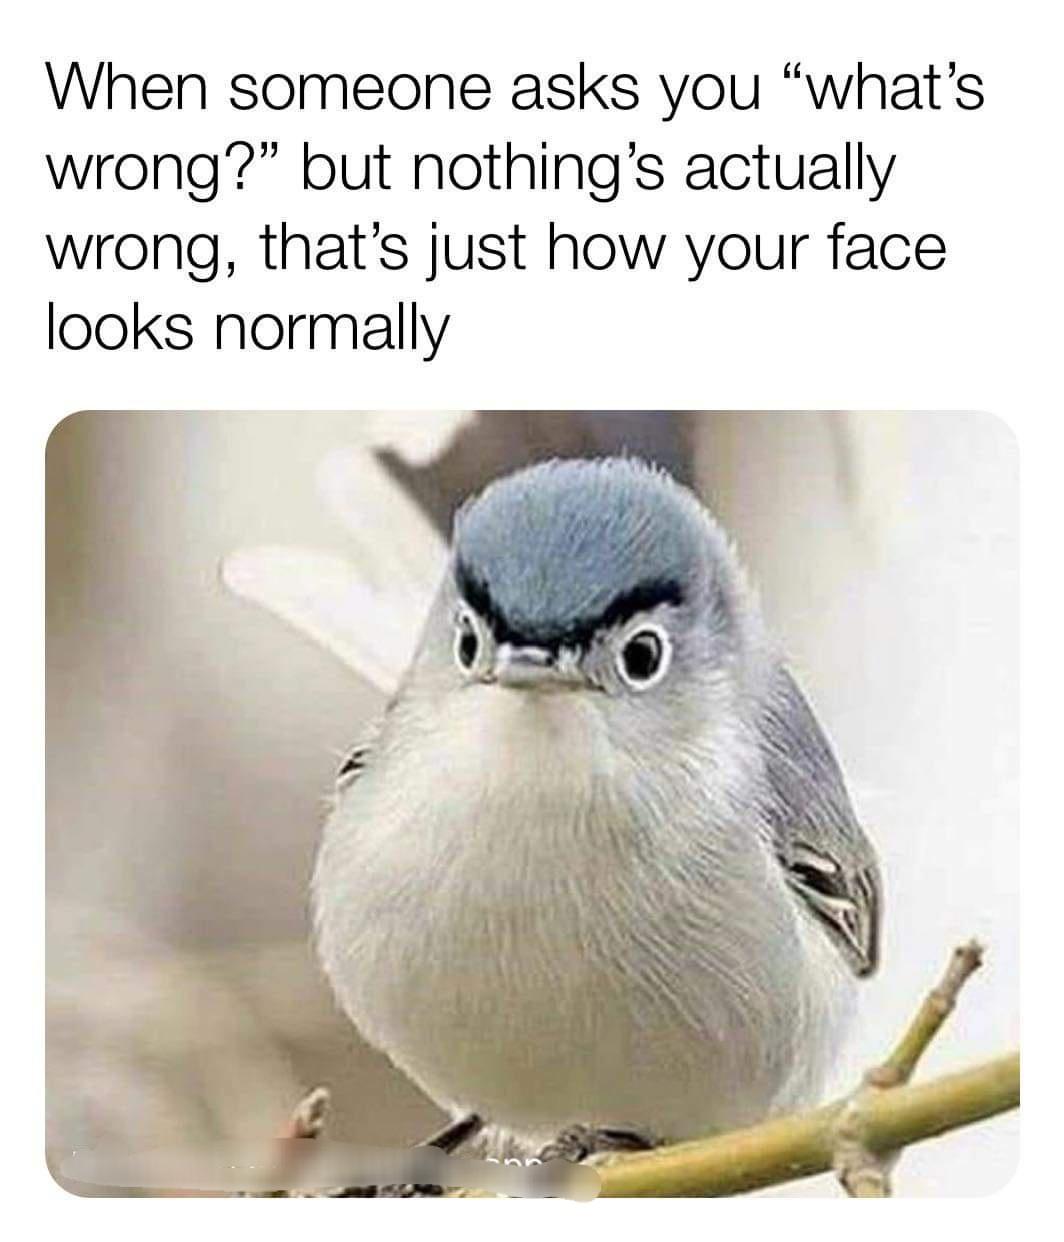 resting bird face - When someone asks you what's wrong?" but nothing's actually wrong, that's just how your face looks normally